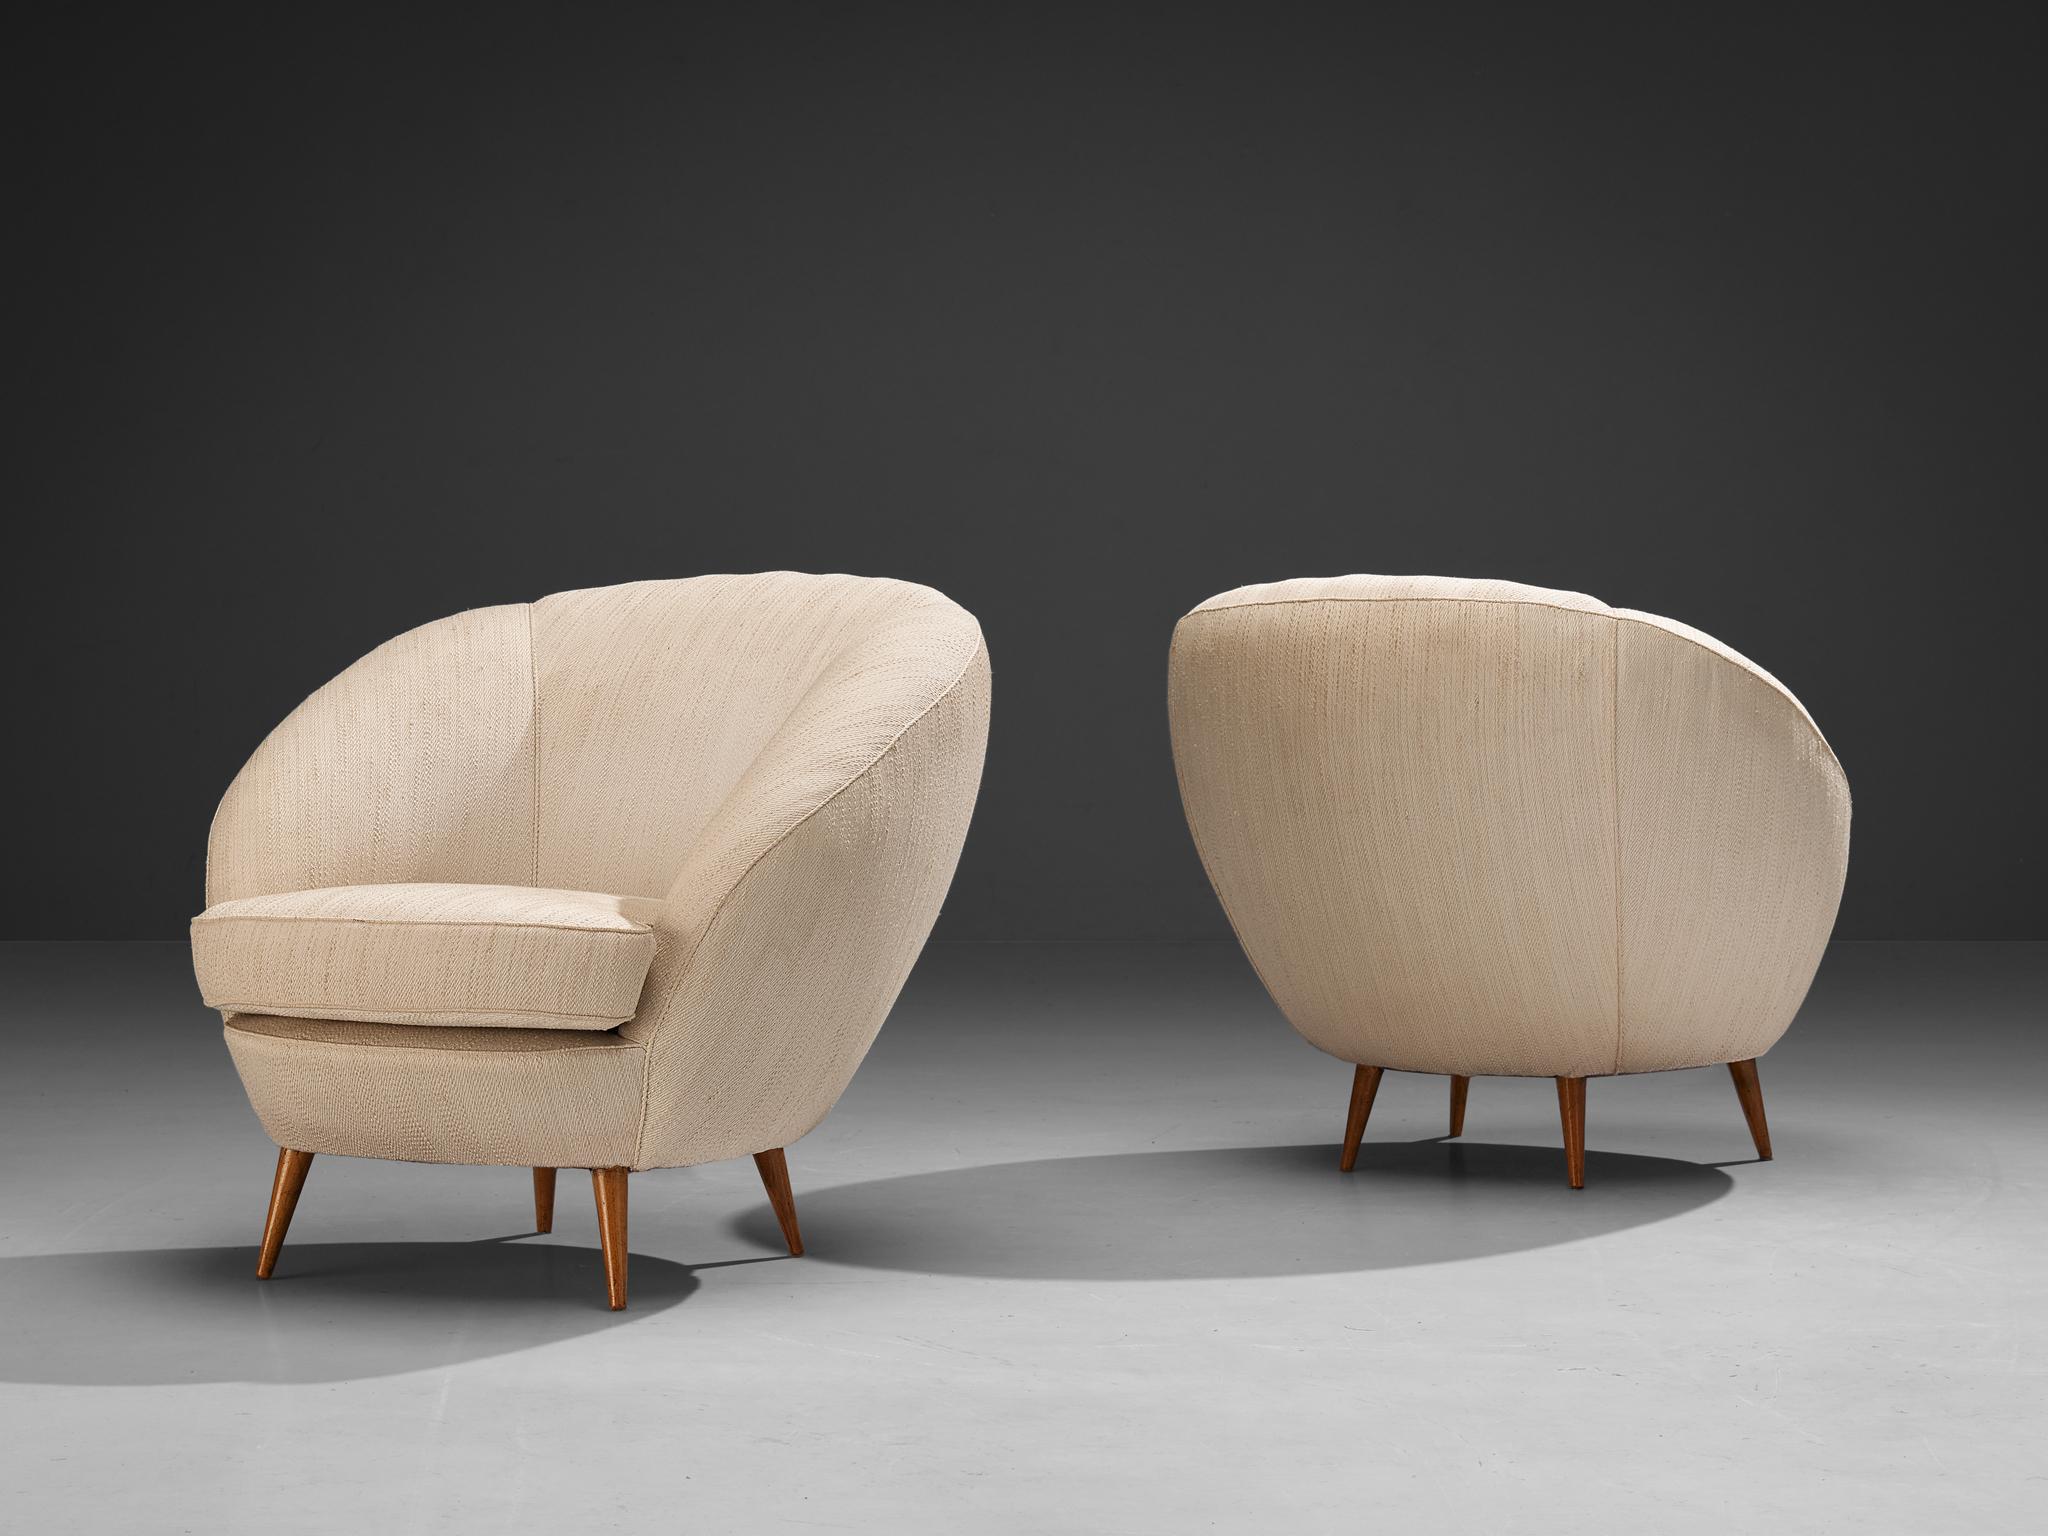 Pair of club chairs, fabric, beech, Italy, 1950s

Classic pair of lounge chairs being a wonderful example of Italian design from the 1950s. The chairs are bold and curvy, yet very elegant. The seating is characterized by bold, curved lines and